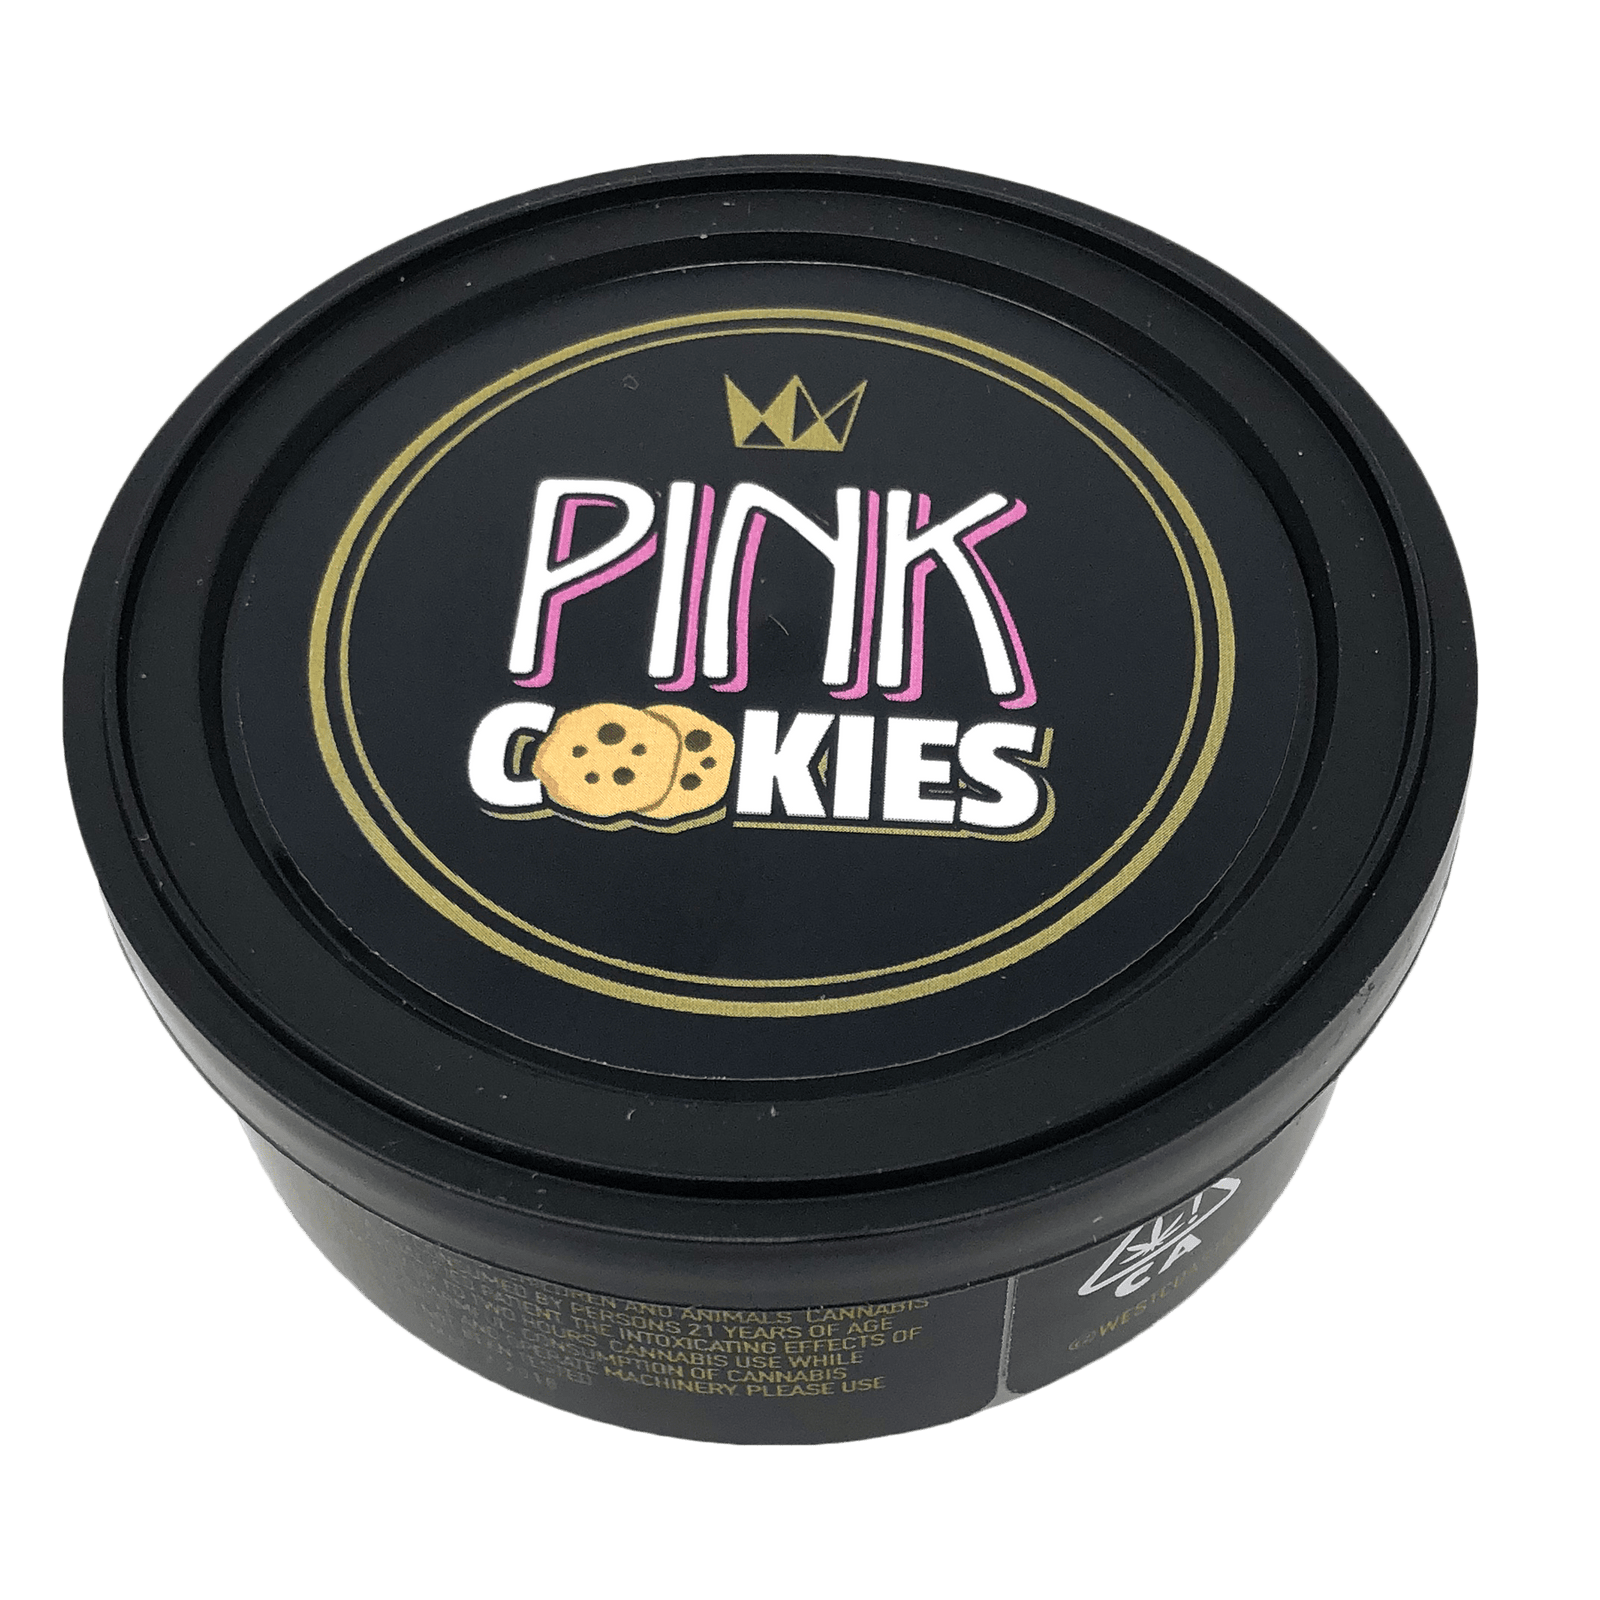 West Coast Cure Pink Cookies - The Balloon Room